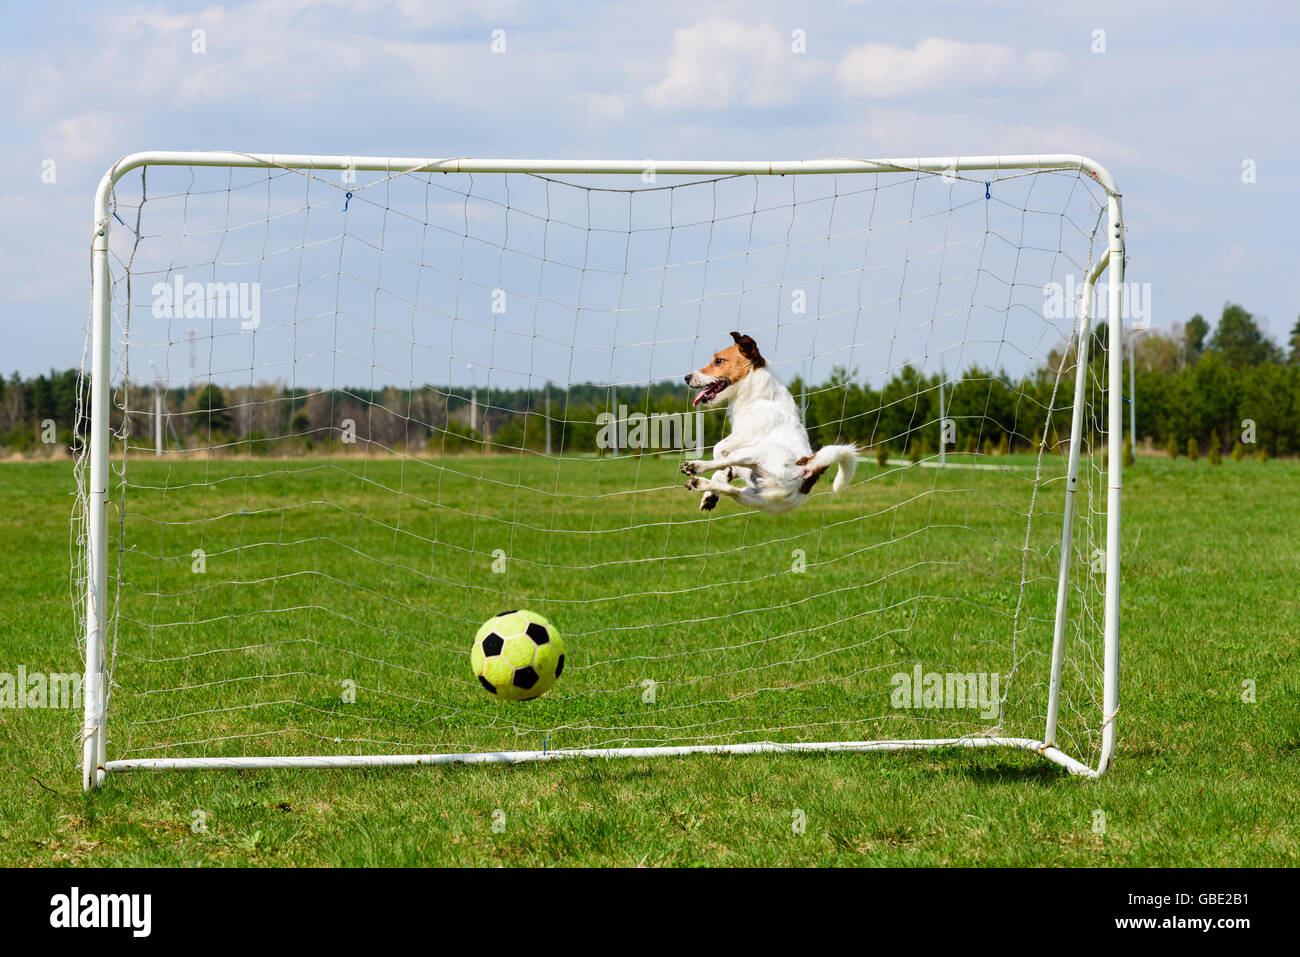 Scoring goal to funny goalie jumping to save it Stock Photo - Alamy